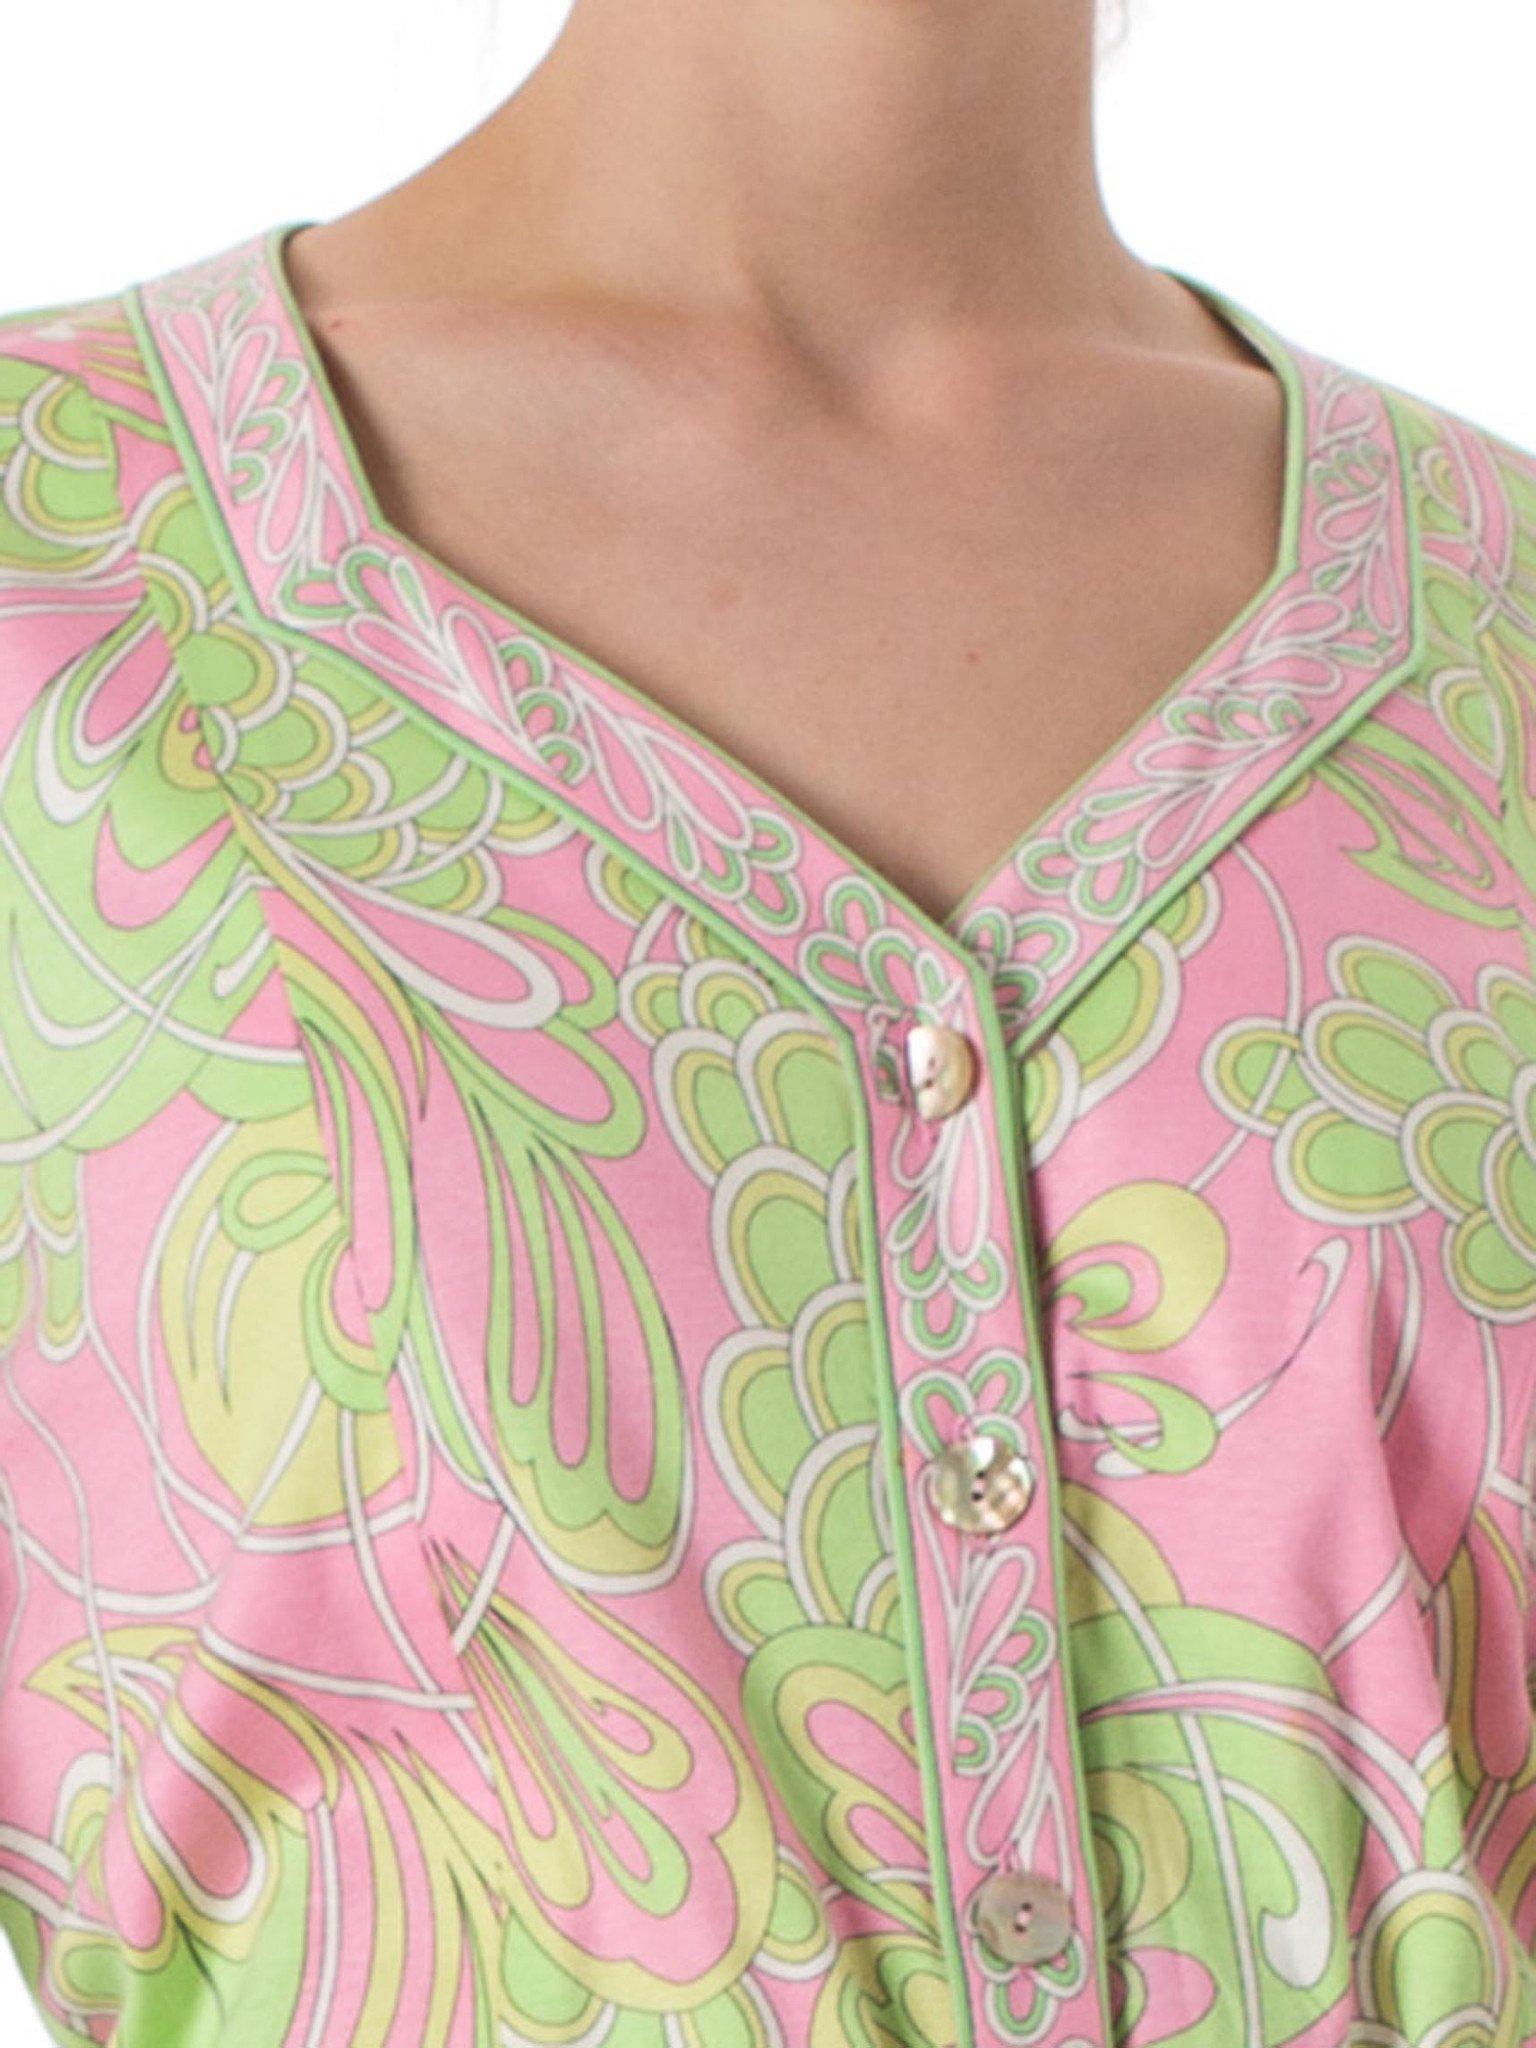 1960S AVERADO BESSI Baby Pink & Green Cotton Jersey Mod Abstract Psychedelic Pr For Sale 1